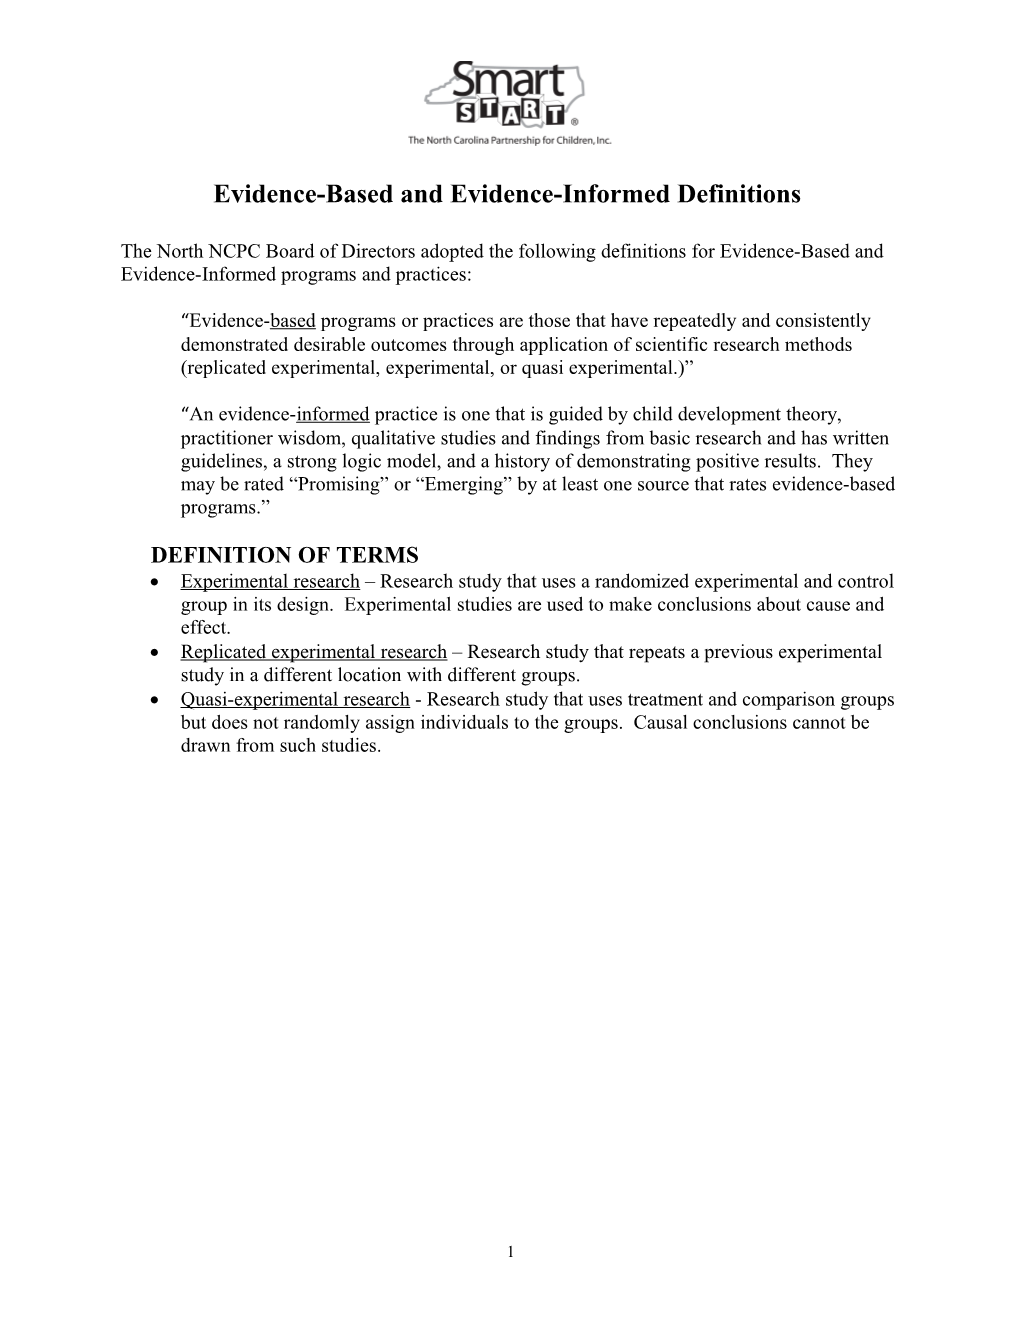 Evidence-Based and Evidence-Informed Definitions